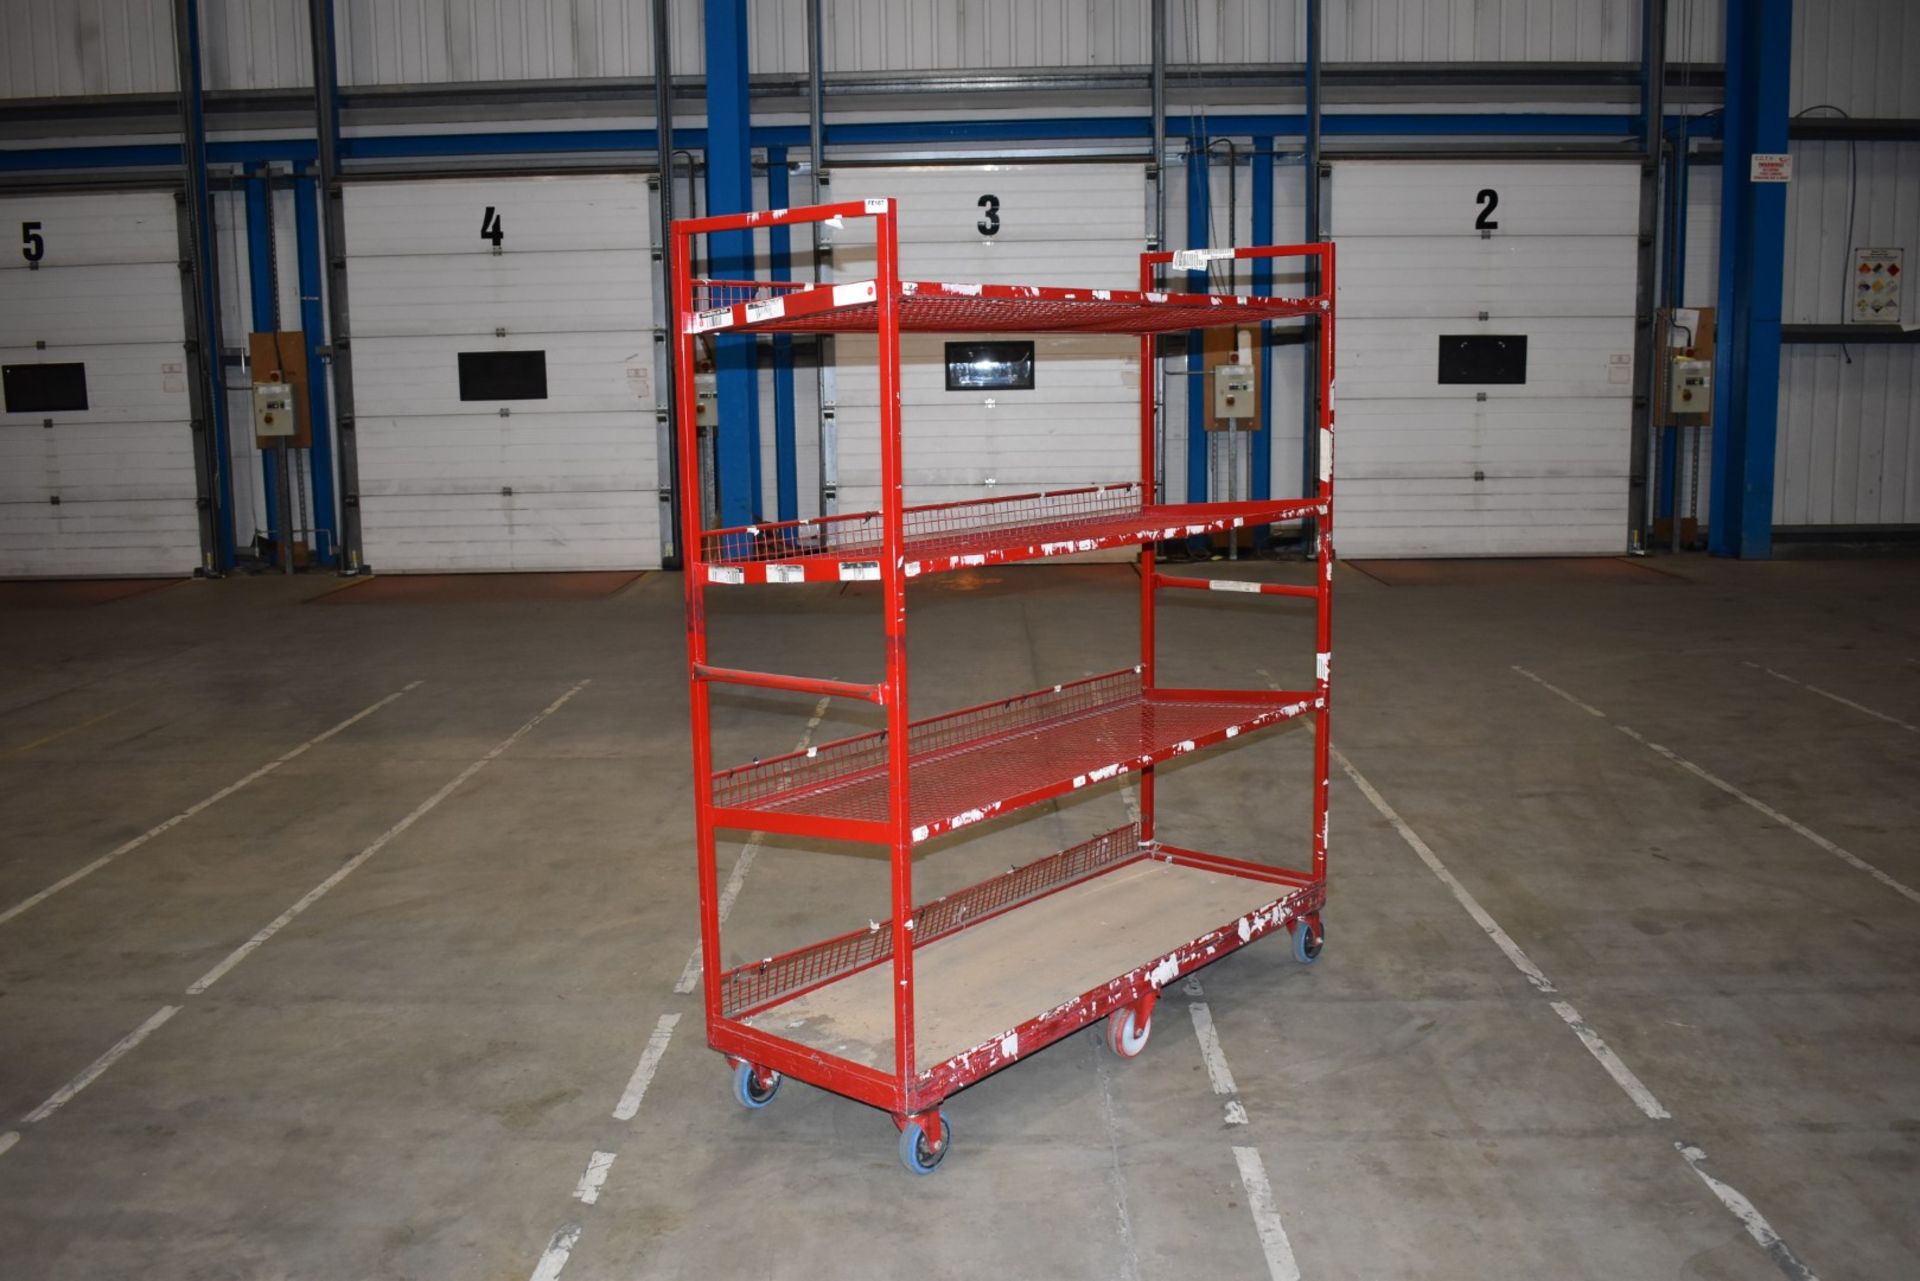 5 x Four Tier Metal Shelf Units on Castors - Ideal For Warehouses or Offices etc - H180 x W160 x D55 - Image 3 of 4